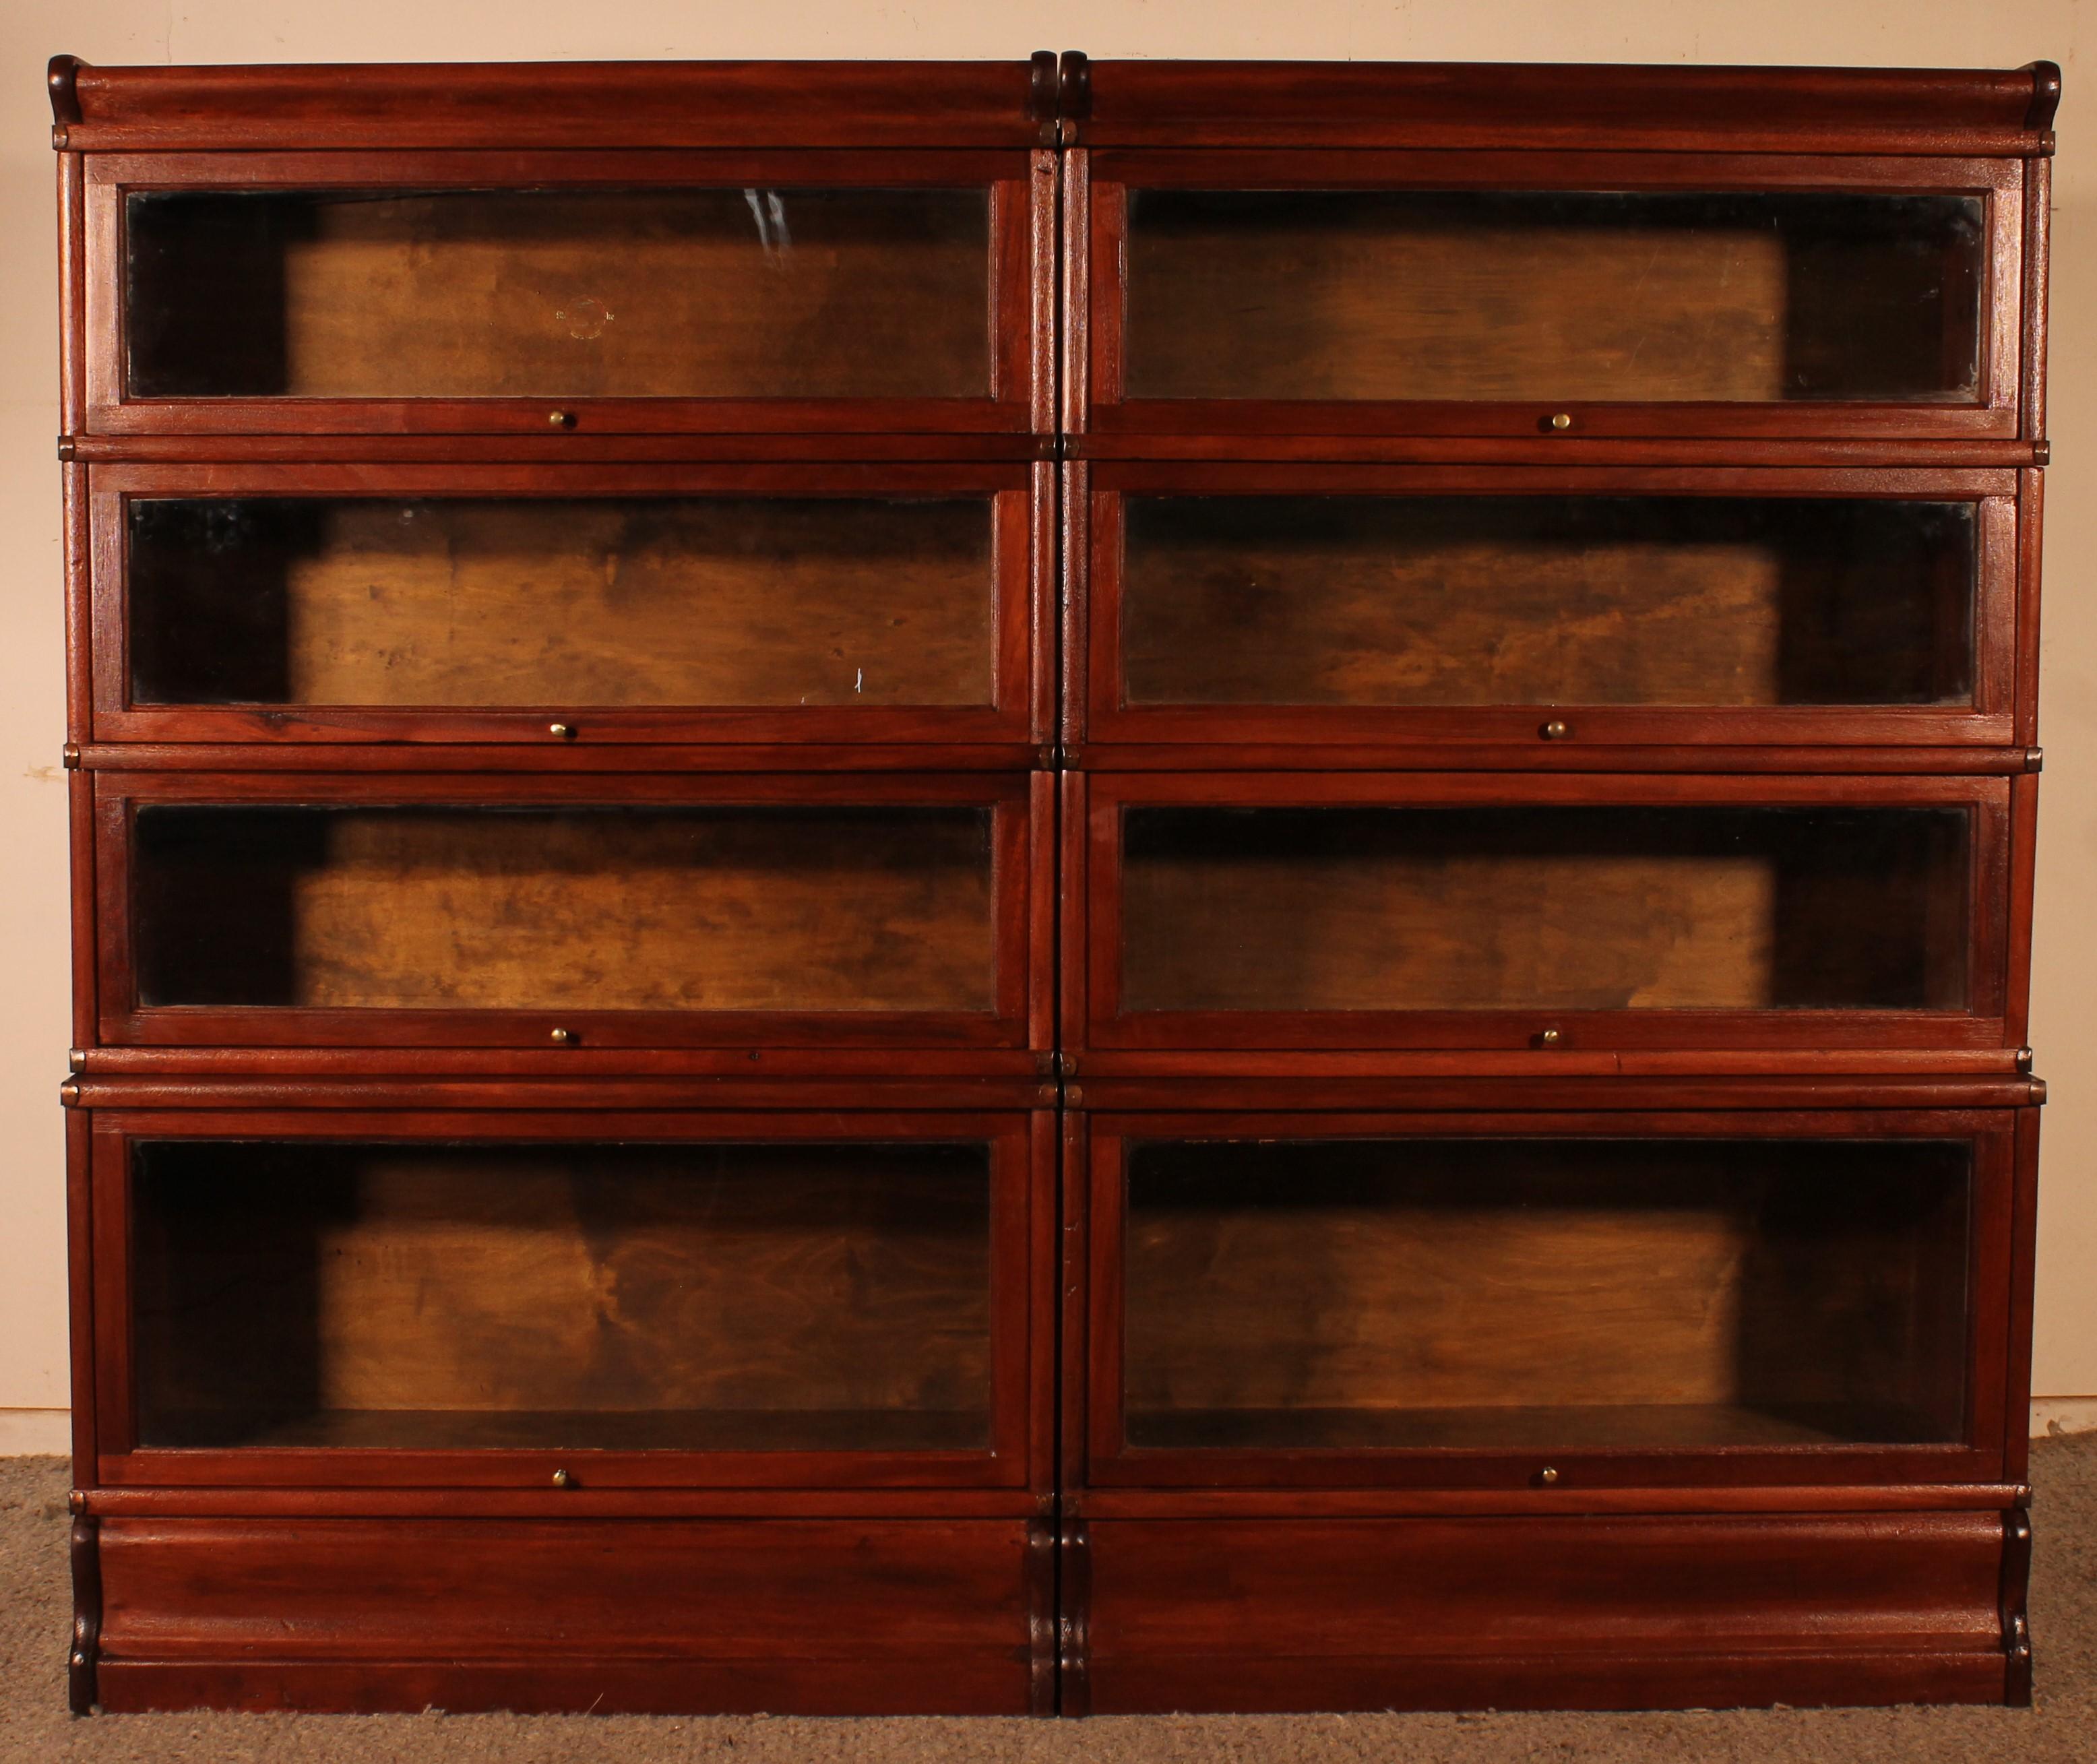 Elegant pair of small Globe Wernicke London bookcases in mahogany from the end of the 19th century-Early 20th century from England which has an advanced lower part. Which is unusual and gives them a lot of character


The two bookcases are